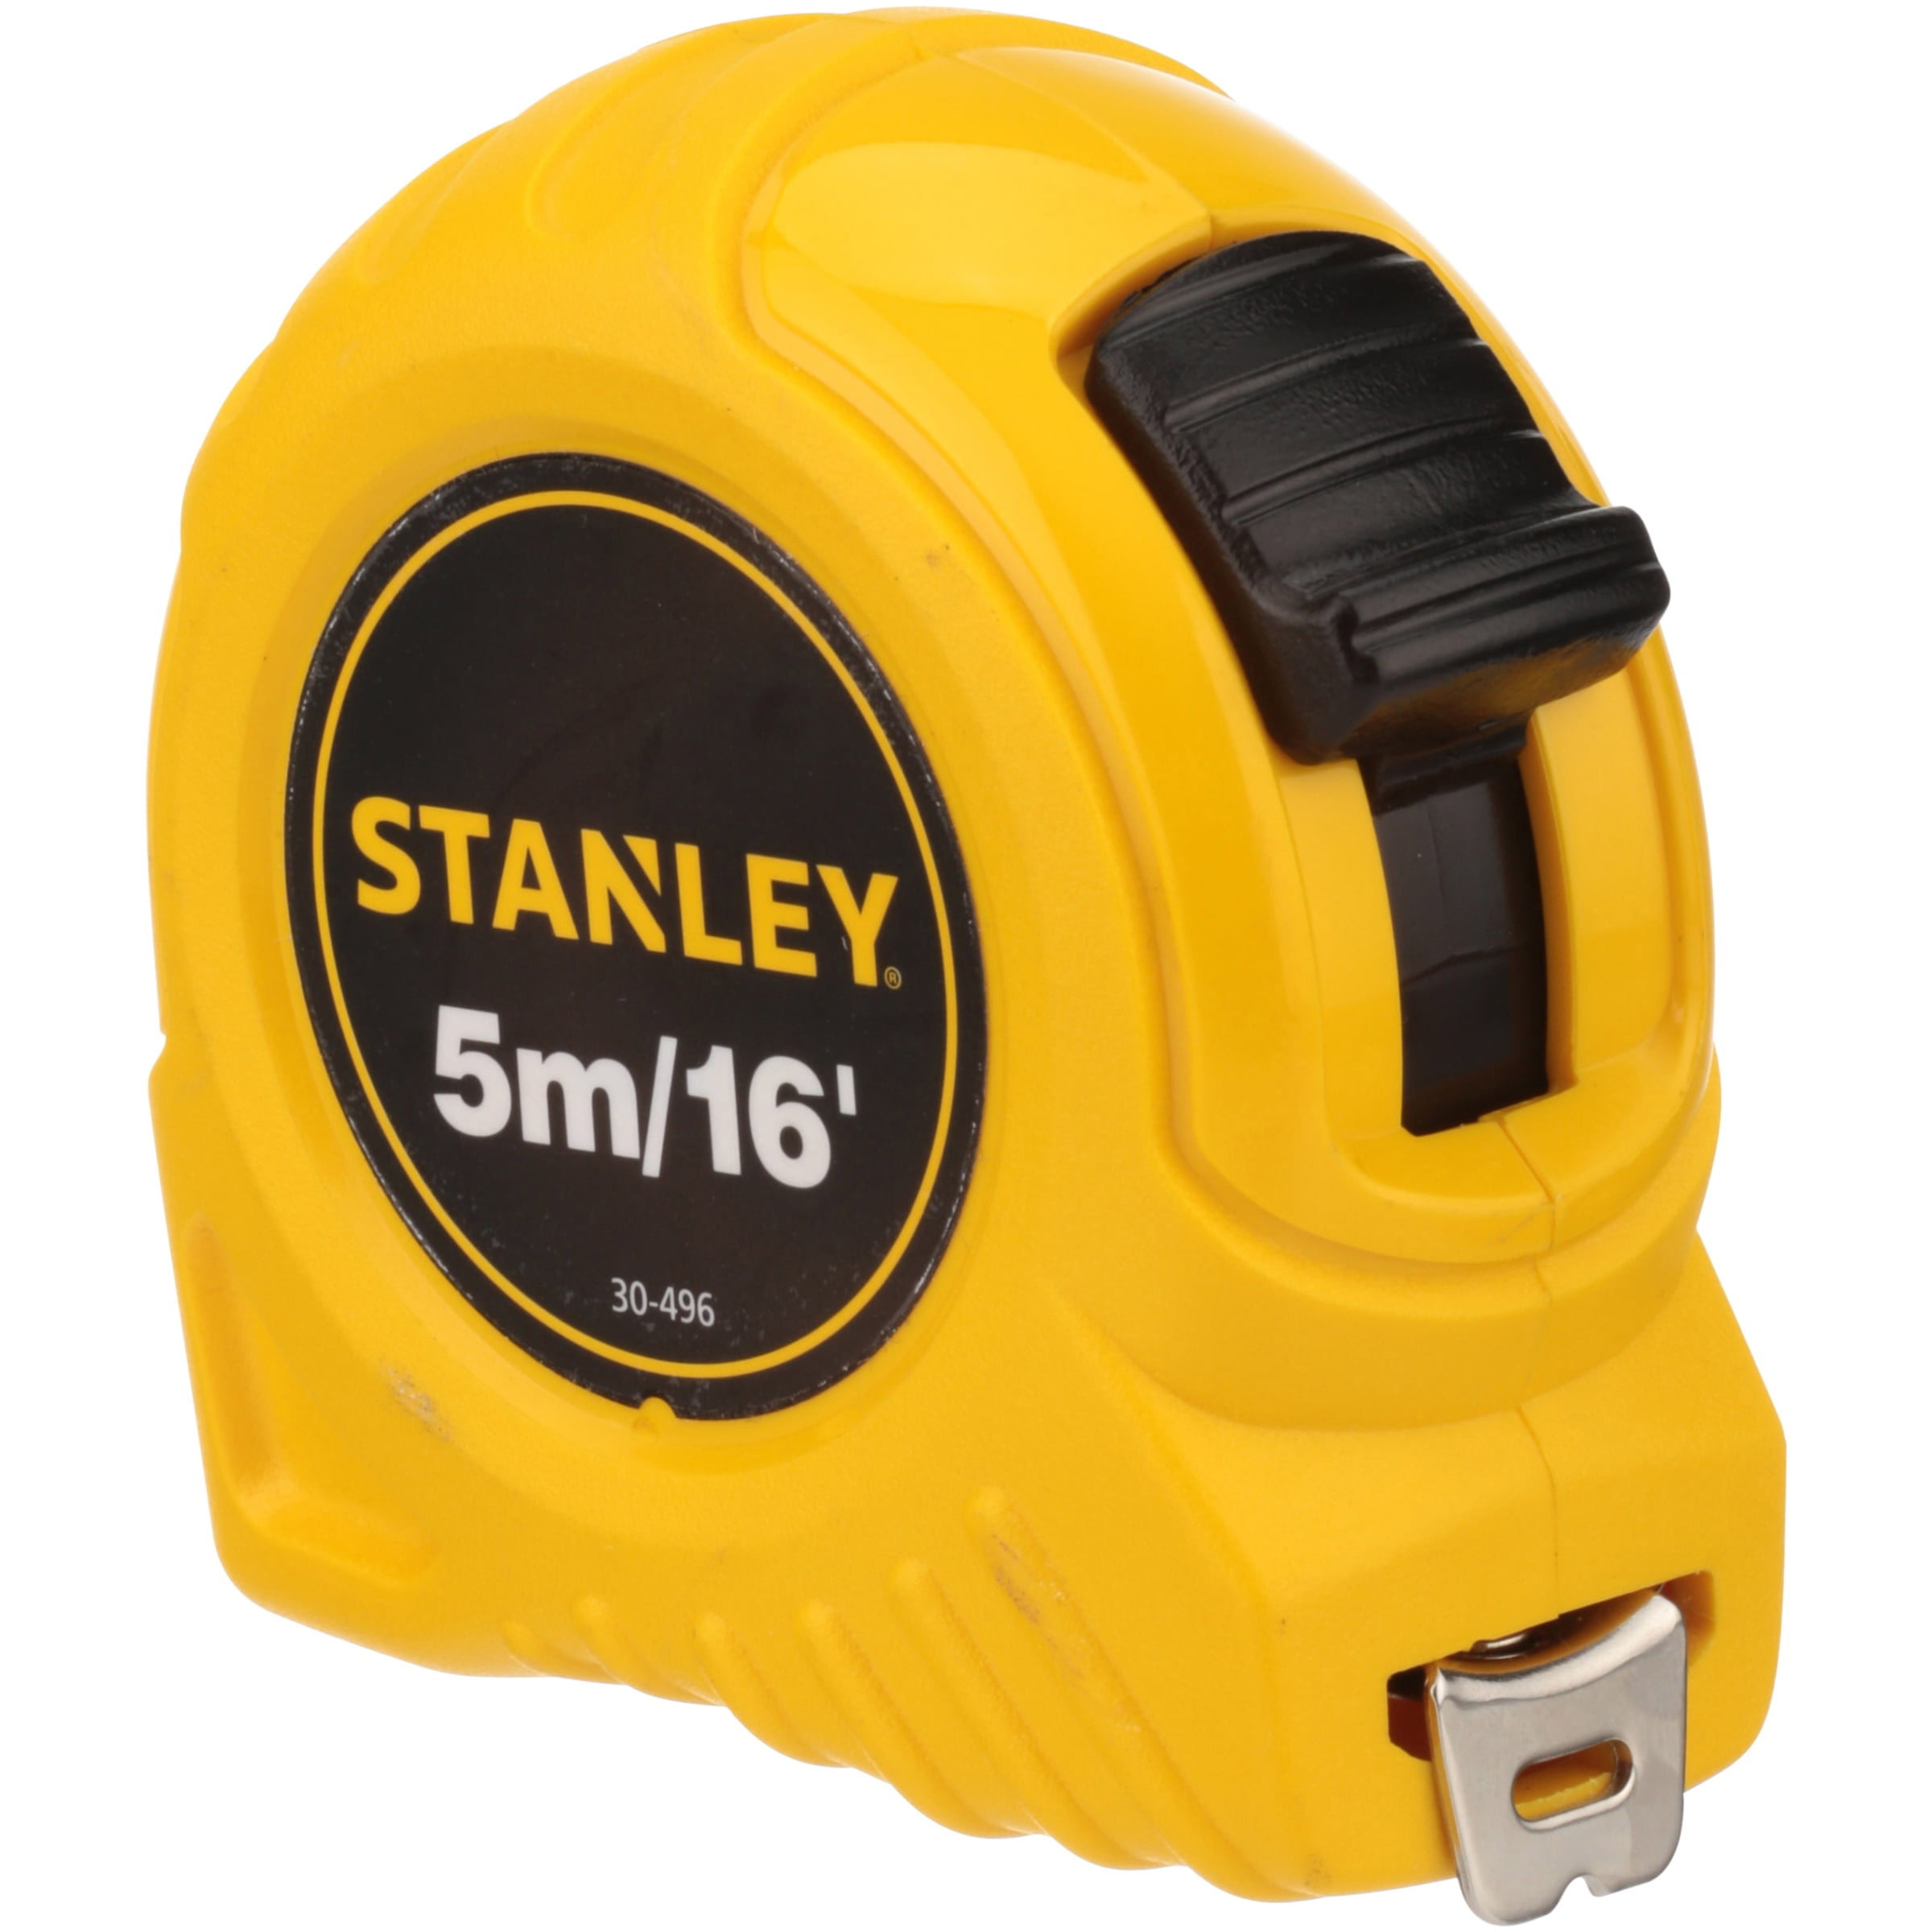 STANLEY 100 ft Tape Measure Stainless Steel Measuring Hand Tool Metric SAE New 